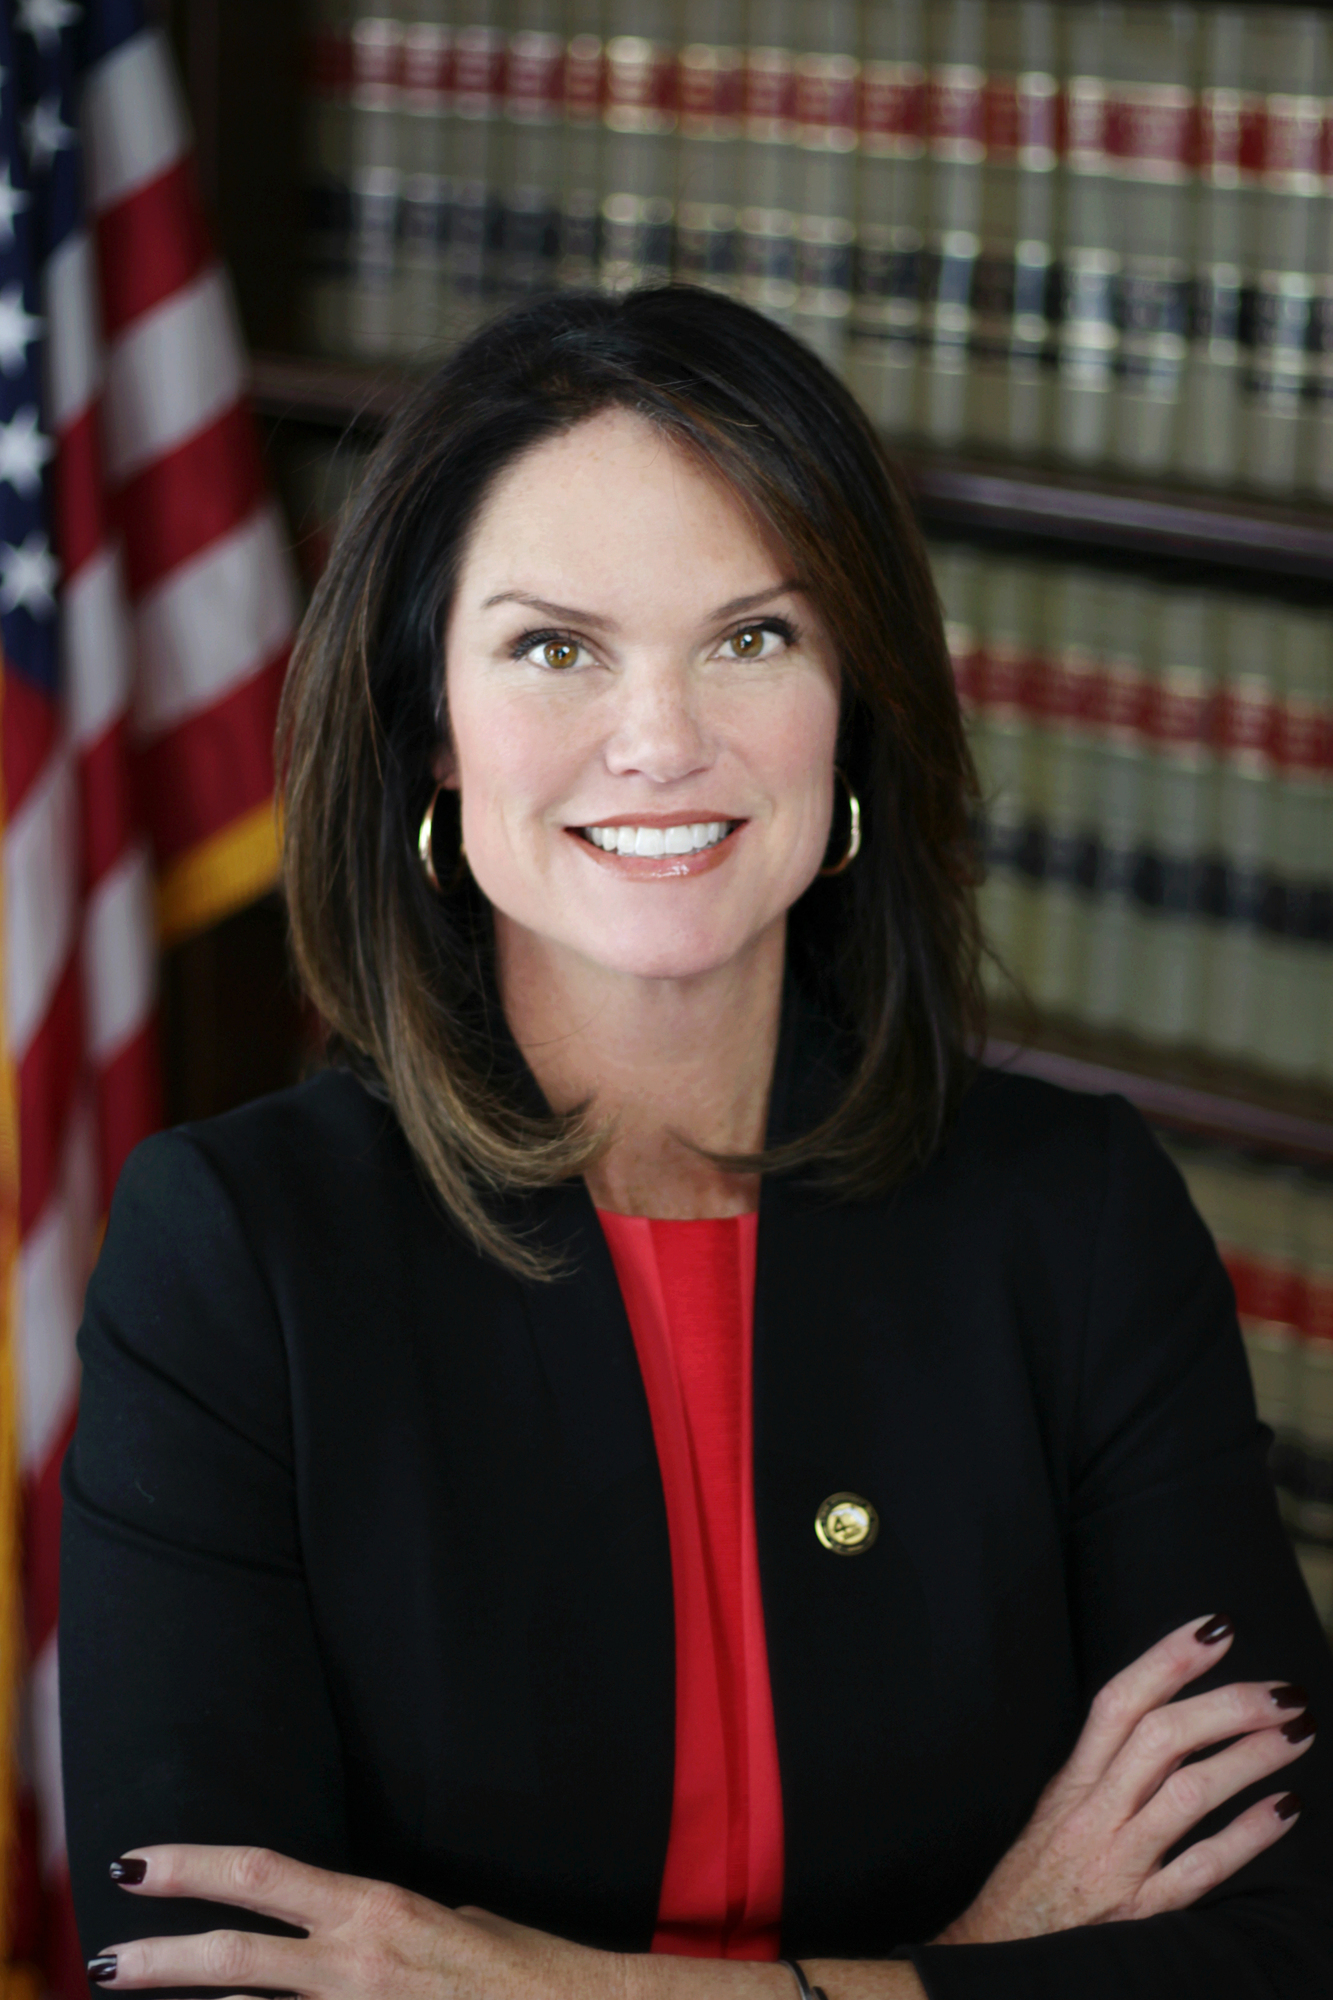 Melissa Nelson, state attorney for the 4th Judicial Circuit